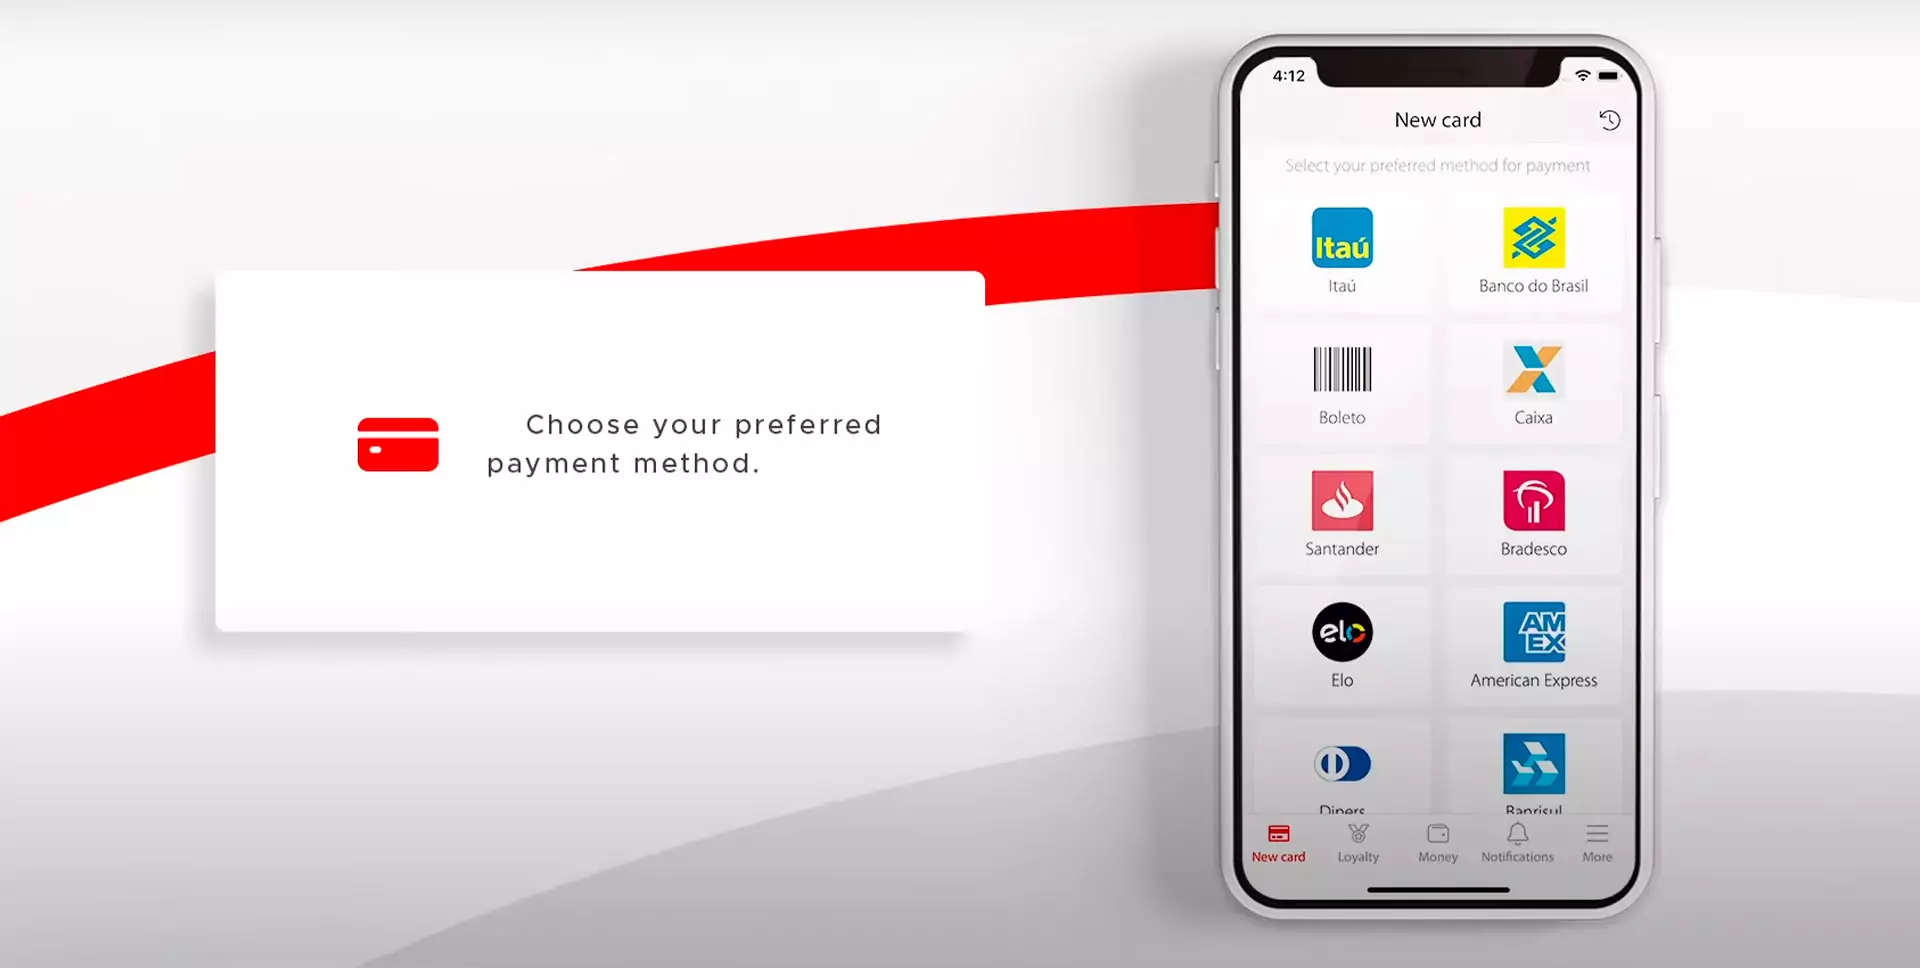 You can choose the payment method for depositing an Astropay card.